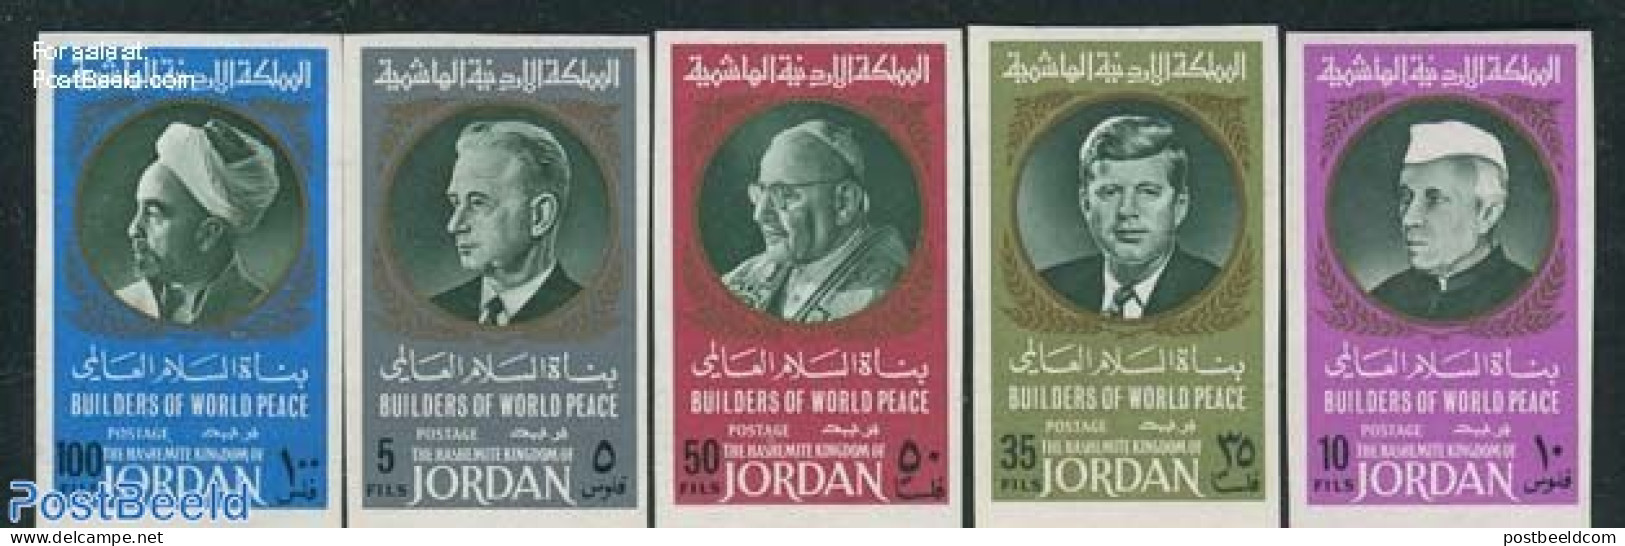 Jordan 1967 Famous People 5v, Imperforated, Mint NH, History - Religion - American Presidents - Politicians - Pope - Popes